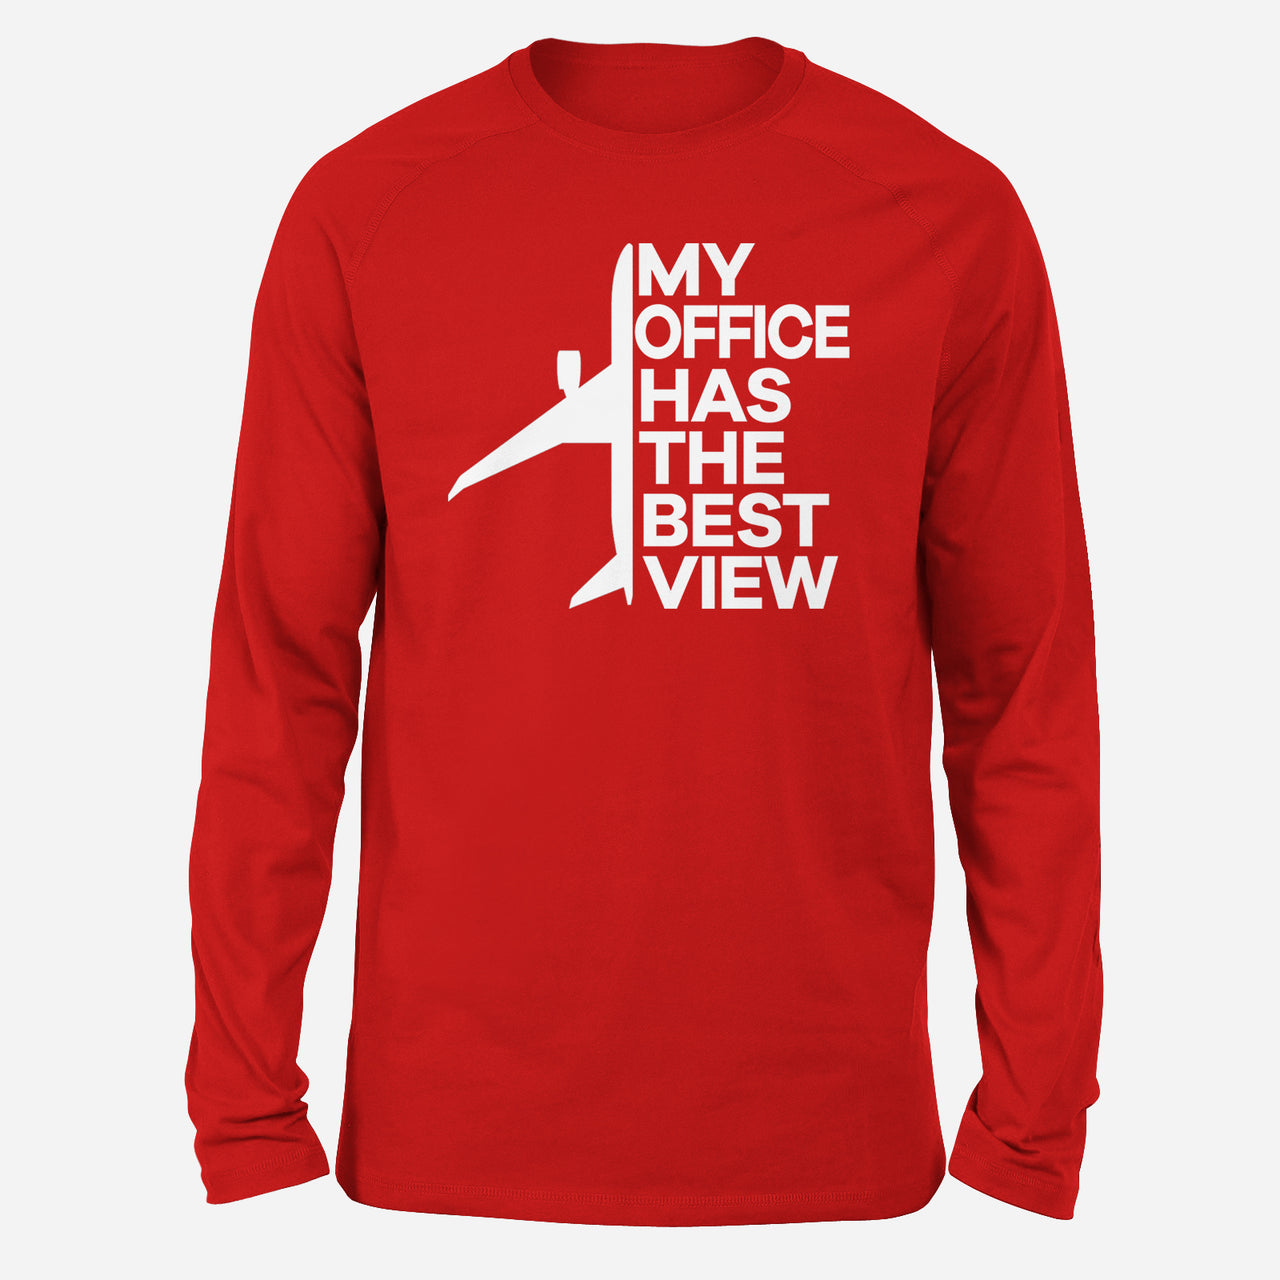 My Office Has The Best View Designed Long-Sleeve T-Shirts